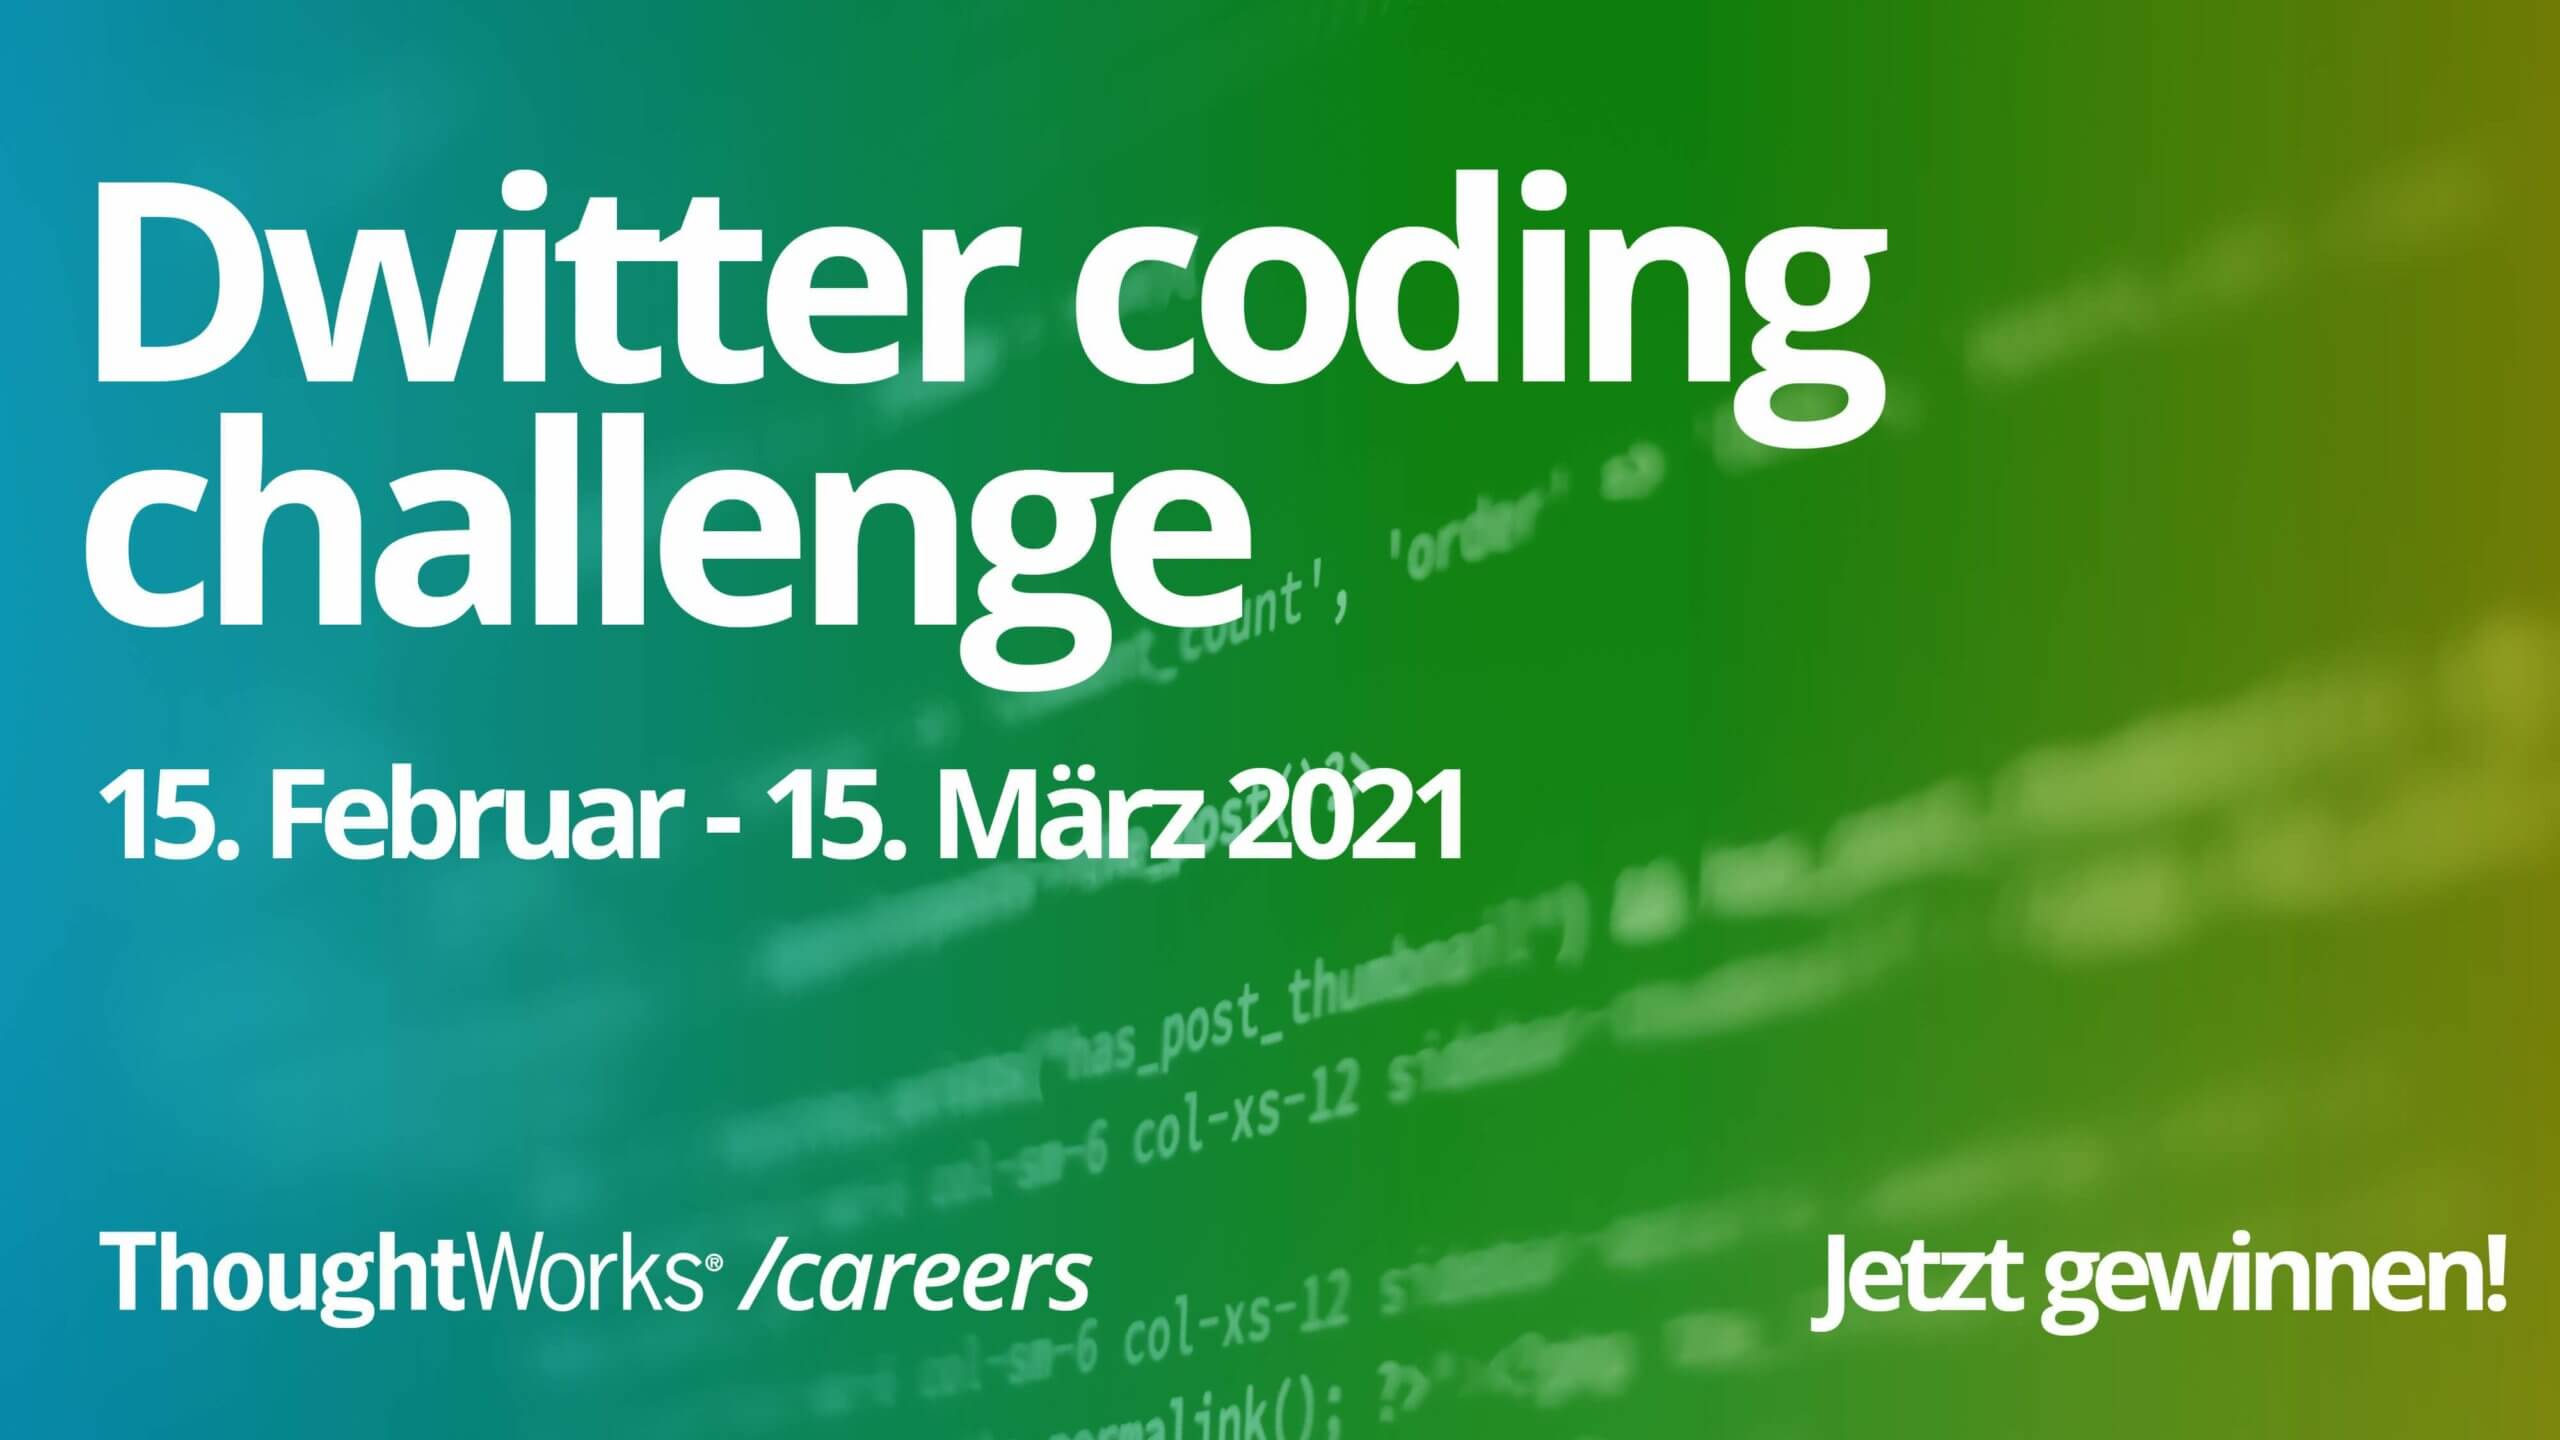 Dwitter Coding Challenge by ThoughtWorks